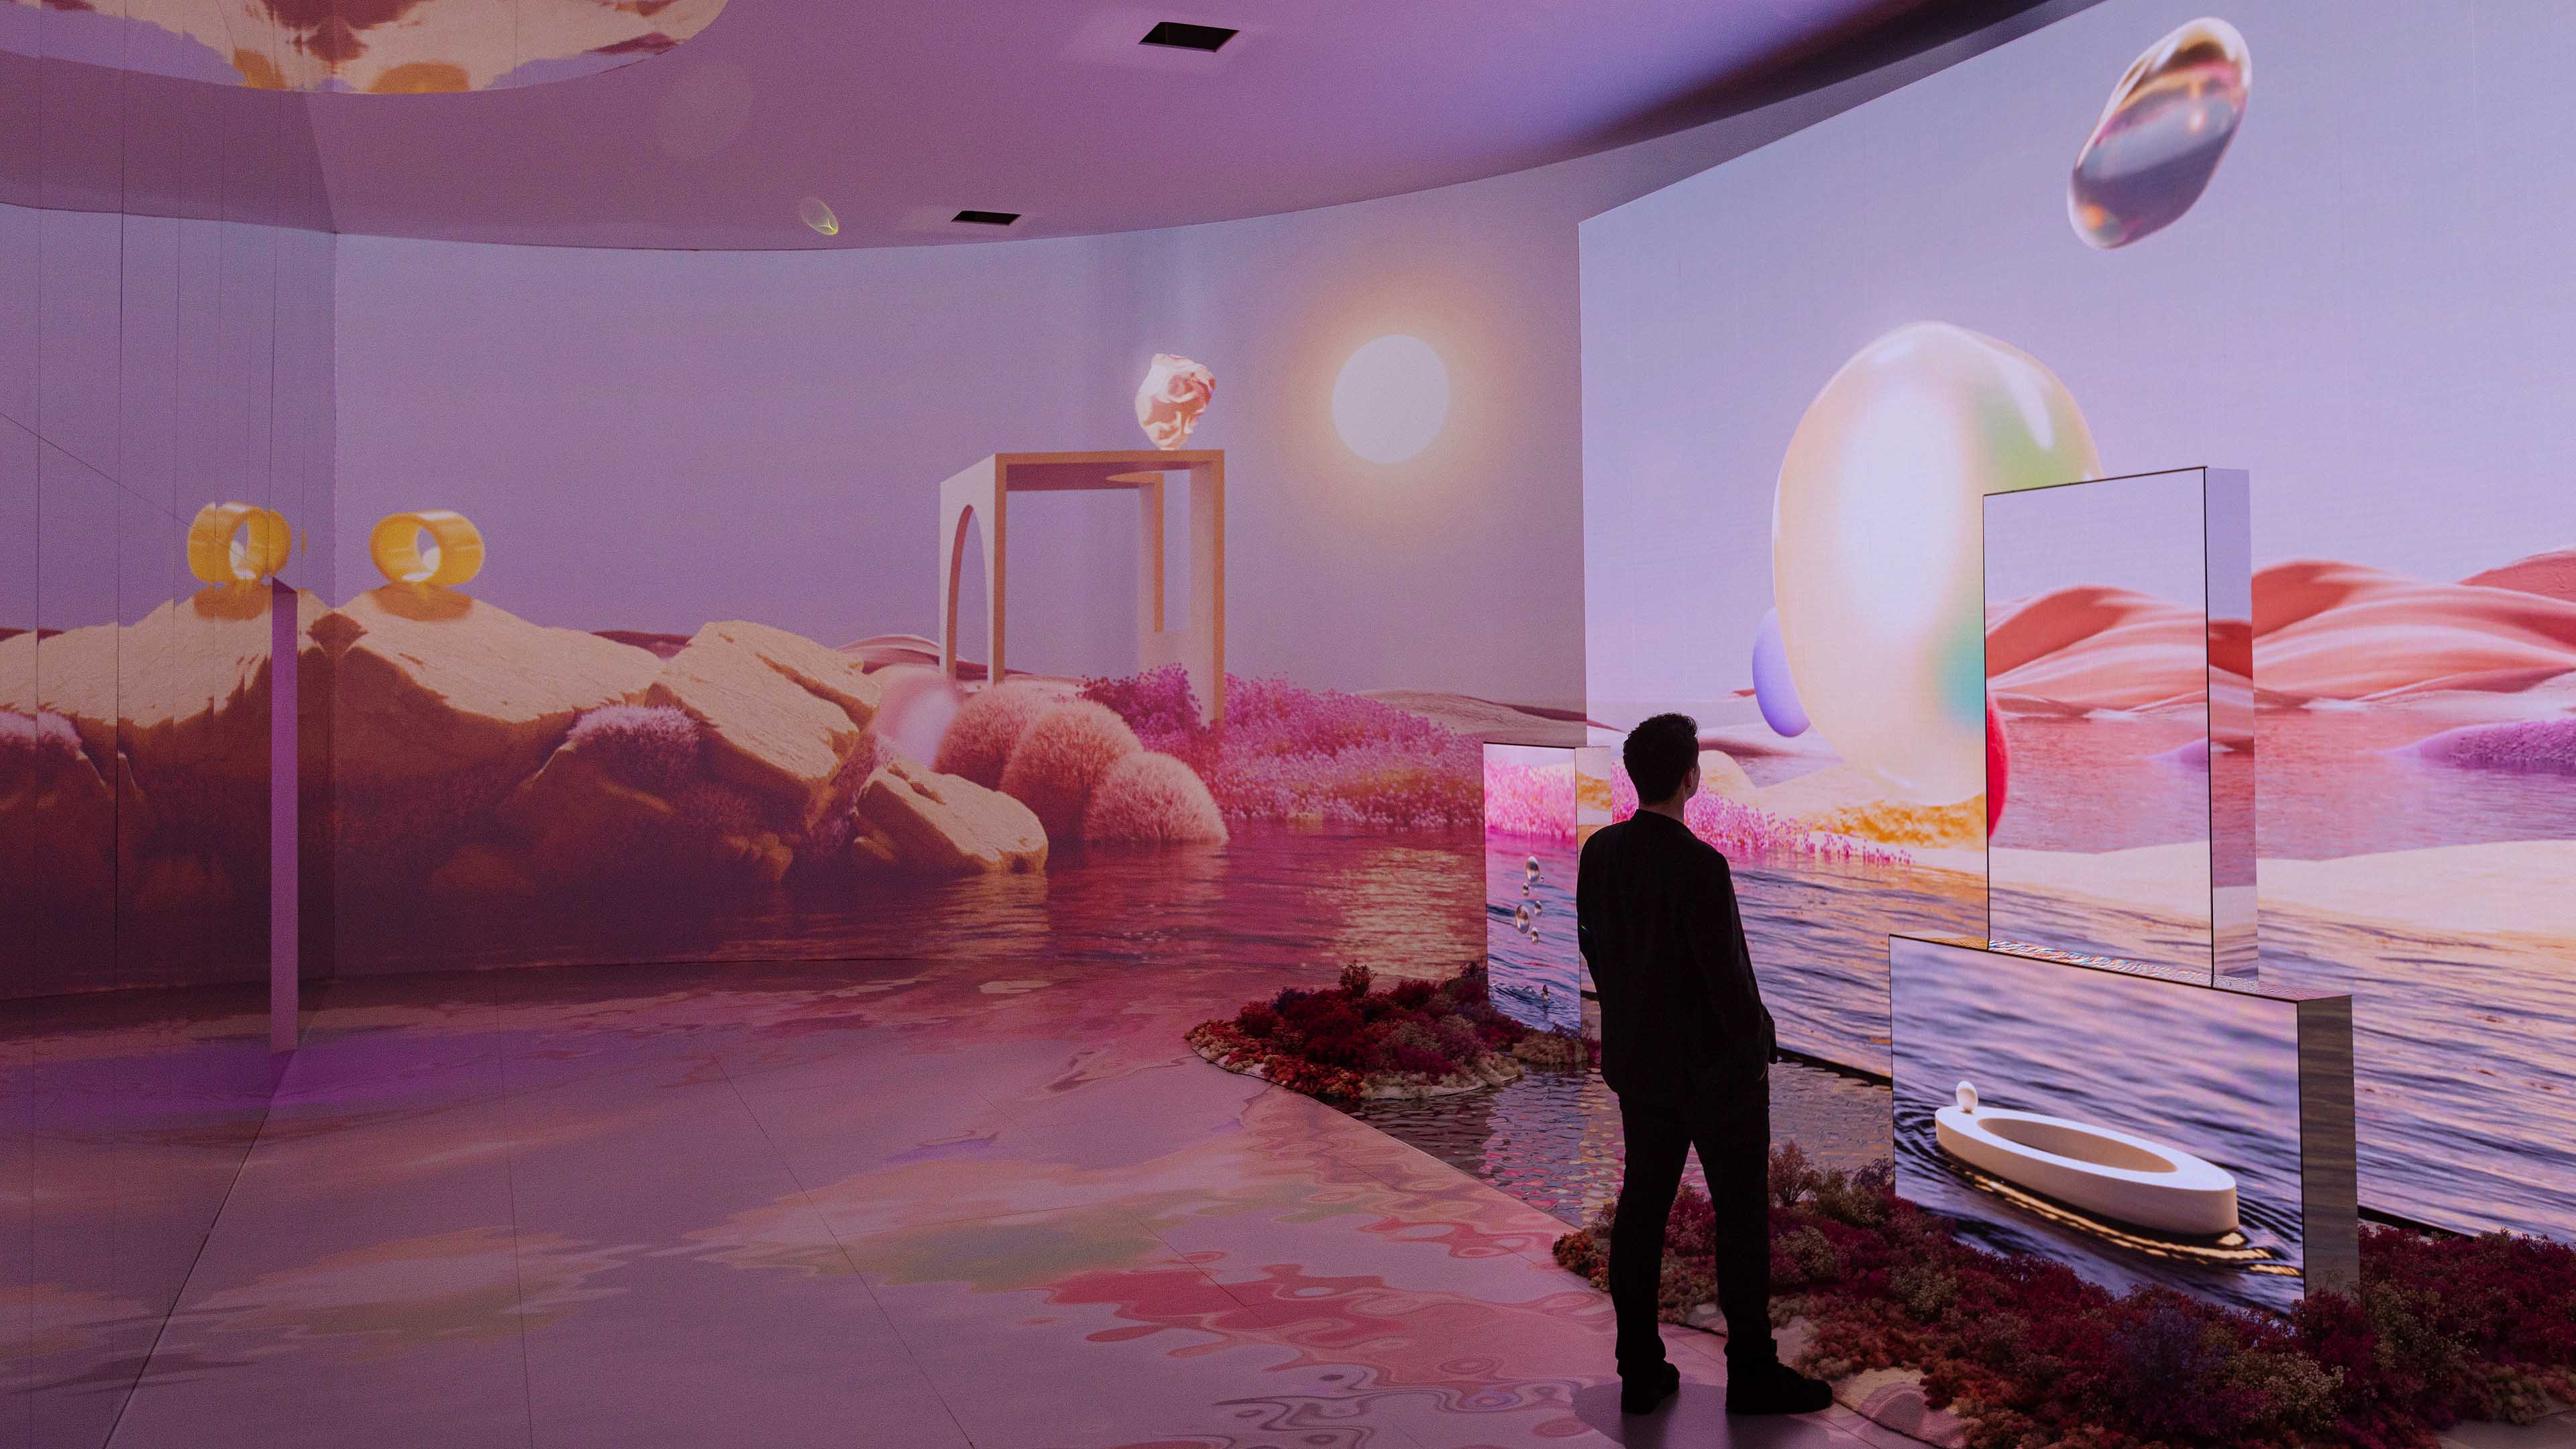 A person stands observing a large-scale, immersive art installation with surreal landscapes projected on walls and panels, creating an otherworldly atmosphere